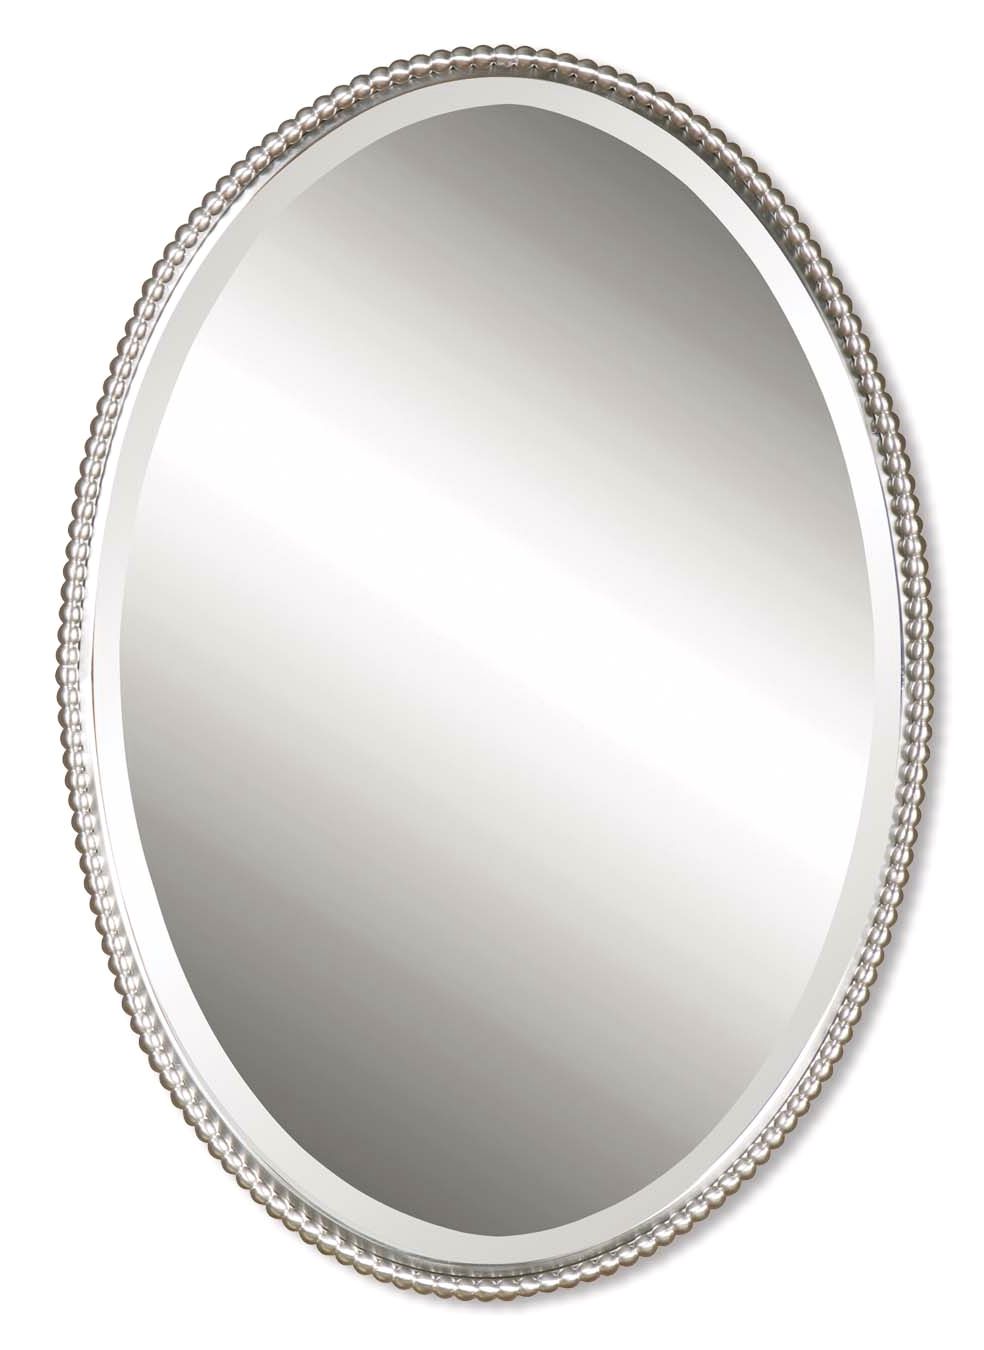 Sherise Modern Brushed Nickel Oval Mirror 01102 B Throughout Newest Nickel Floating Wall Mirrors (View 10 of 15)